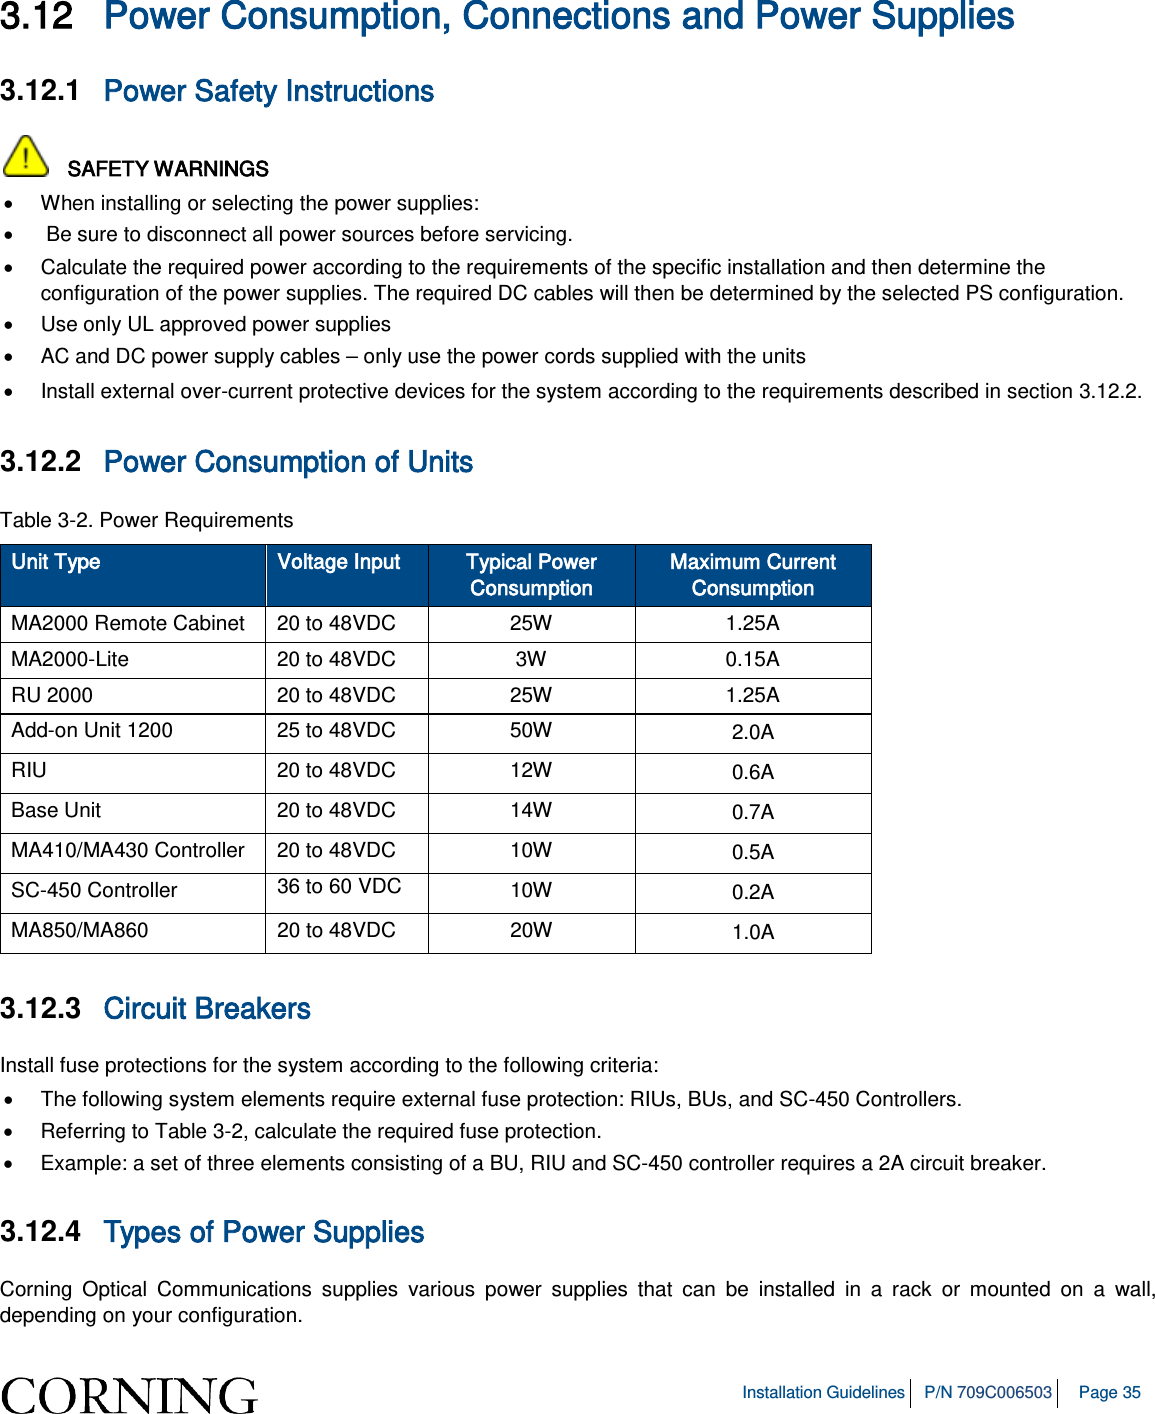   Installation Guidelines P/N 709C006503 Page 35  3.12 Power Consumption, Connections and Power Supplies 3.12.1  Power Safety Instructions    SAFETY WARNINGS • When installing or selecting the power supplies:  •   Be sure to disconnect all power sources before servicing. • Calculate the required power according to the requirements of the specific installation and then determine the configuration of the power supplies. The required DC cables will then be determined by the selected PS configuration. • Use only UL approved power supplies  • AC and DC power supply cables – only use the power cords supplied with the units  • Install external over-current protective devices for the system according to the requirements described in section  3.12.2. 3.12.2  Power Consumption of Units Table  3-2. Power Requirements Unit Type Voltage Input Typical Power Consumption Maximum Current Consumption MA2000 Remote Cabinet  20 to 48VDC  25W  1.25A MA2000-Lite 20 to 48VDC 3W 0.15A RU 2000 20 to 48VDC 25W 1.25A Add-on Unit 1200 25 to 48VDC 50W 2.0A RIU 20 to 48VDC 12W 0.6A Base Unit 20 to 48VDC 14W 0.7A MA410/MA430 Controller 20 to 48VDC 10W 0.5A SC-450 Controller 36 to 60 VDC 10W 0.2A MA850/MA860 20 to 48VDC 20W 1.0A 3.12.3  Circuit Breakers Install fuse protections for the system according to the following criteria:  • The following system elements require external fuse protection: RIUs, BUs, and SC-450 Controllers. • Referring to Table  3-2, calculate the required fuse protection.  • Example: a set of three elements consisting of a BU, RIU and SC-450 controller requires a 2A circuit breaker.  3.12.4  Types of Power Supplies Corning Optical Communications supplies various power supplies that can be installed in a rack or mounted on a wall, depending on your configuration.   